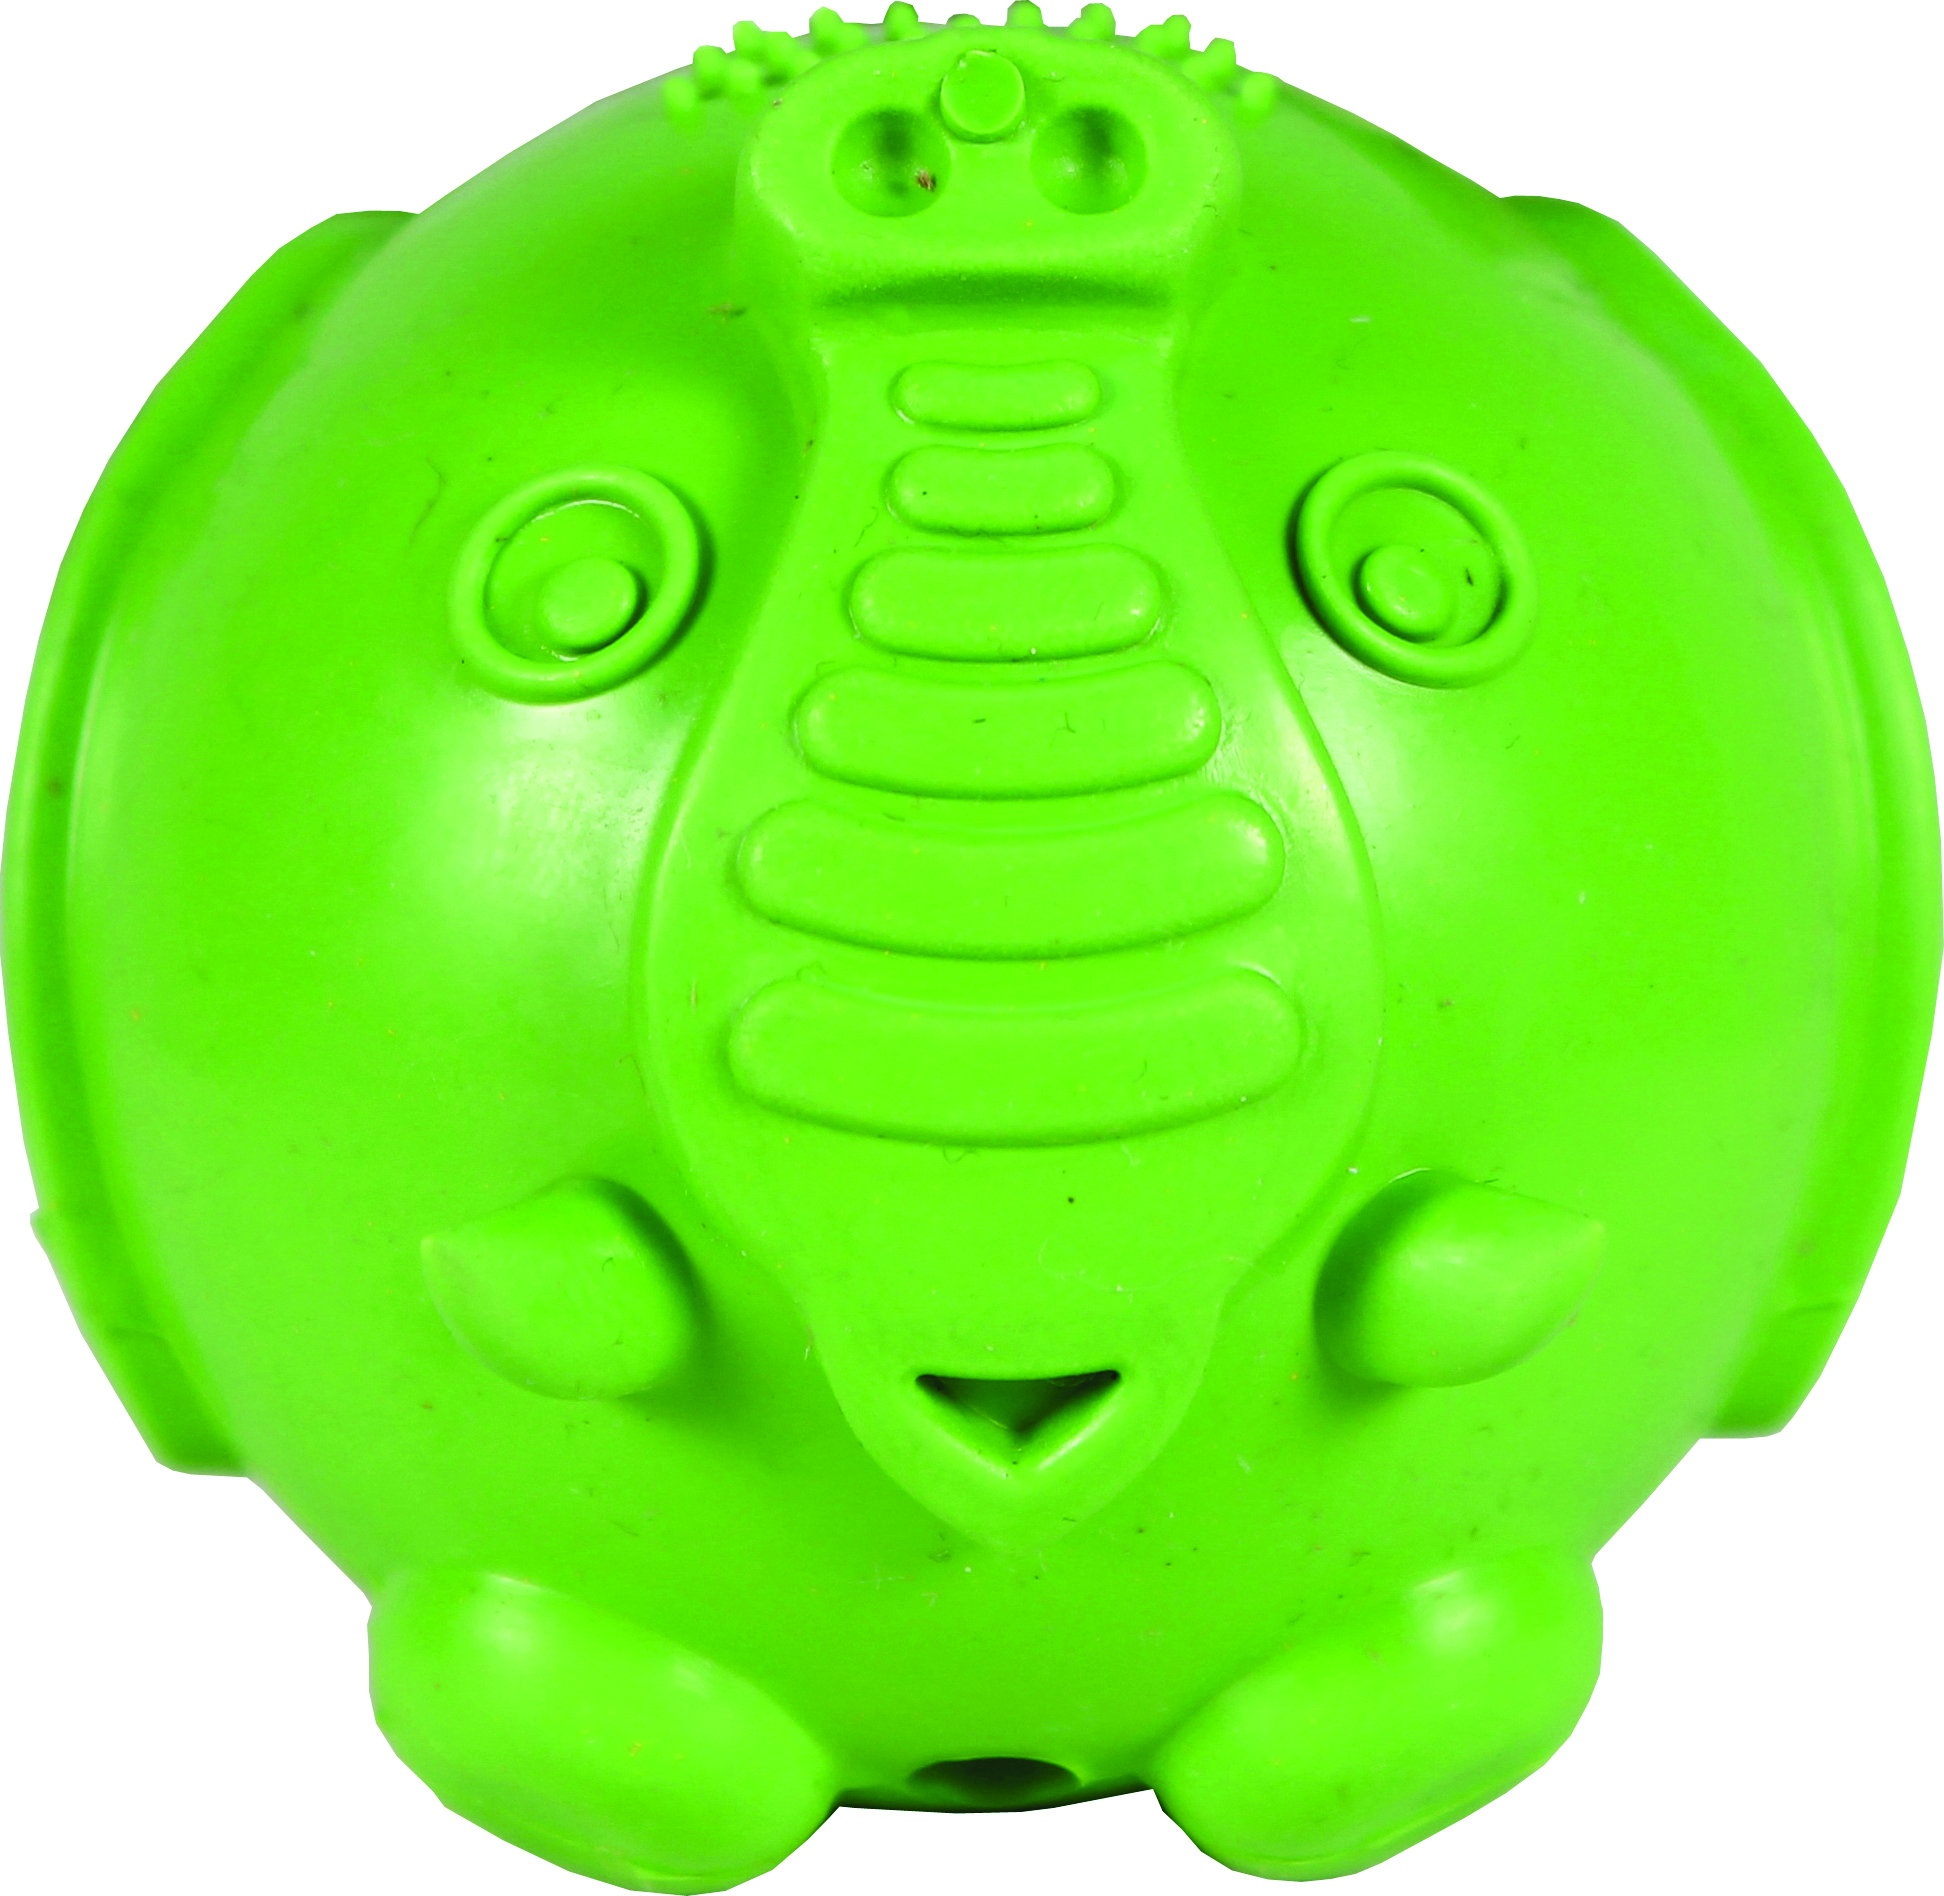 BUSY BUDDY ELEPHUNK TREAT DISPENSER FOR DOGS